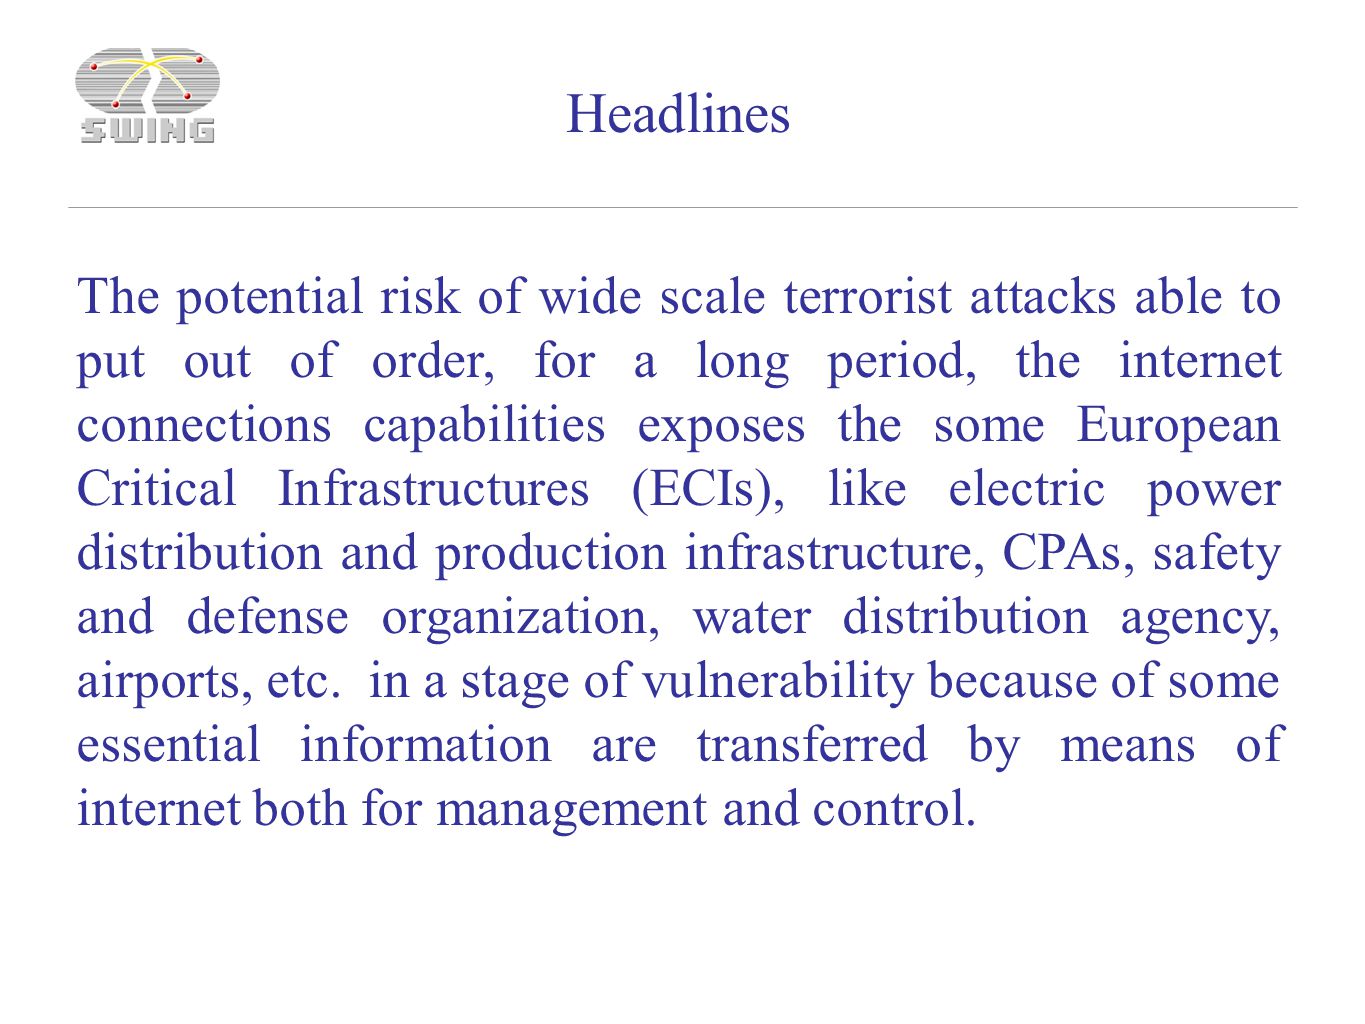 The potential risk of wide scale terrorist attacks able to put out of order, for a long period, the internet connections capabilities exposes the some European Critical Infrastructures (ECIs), like electric power distribution and production infrastructure, CPAs, safety and defense organization, water distribution agency, airports, etc.